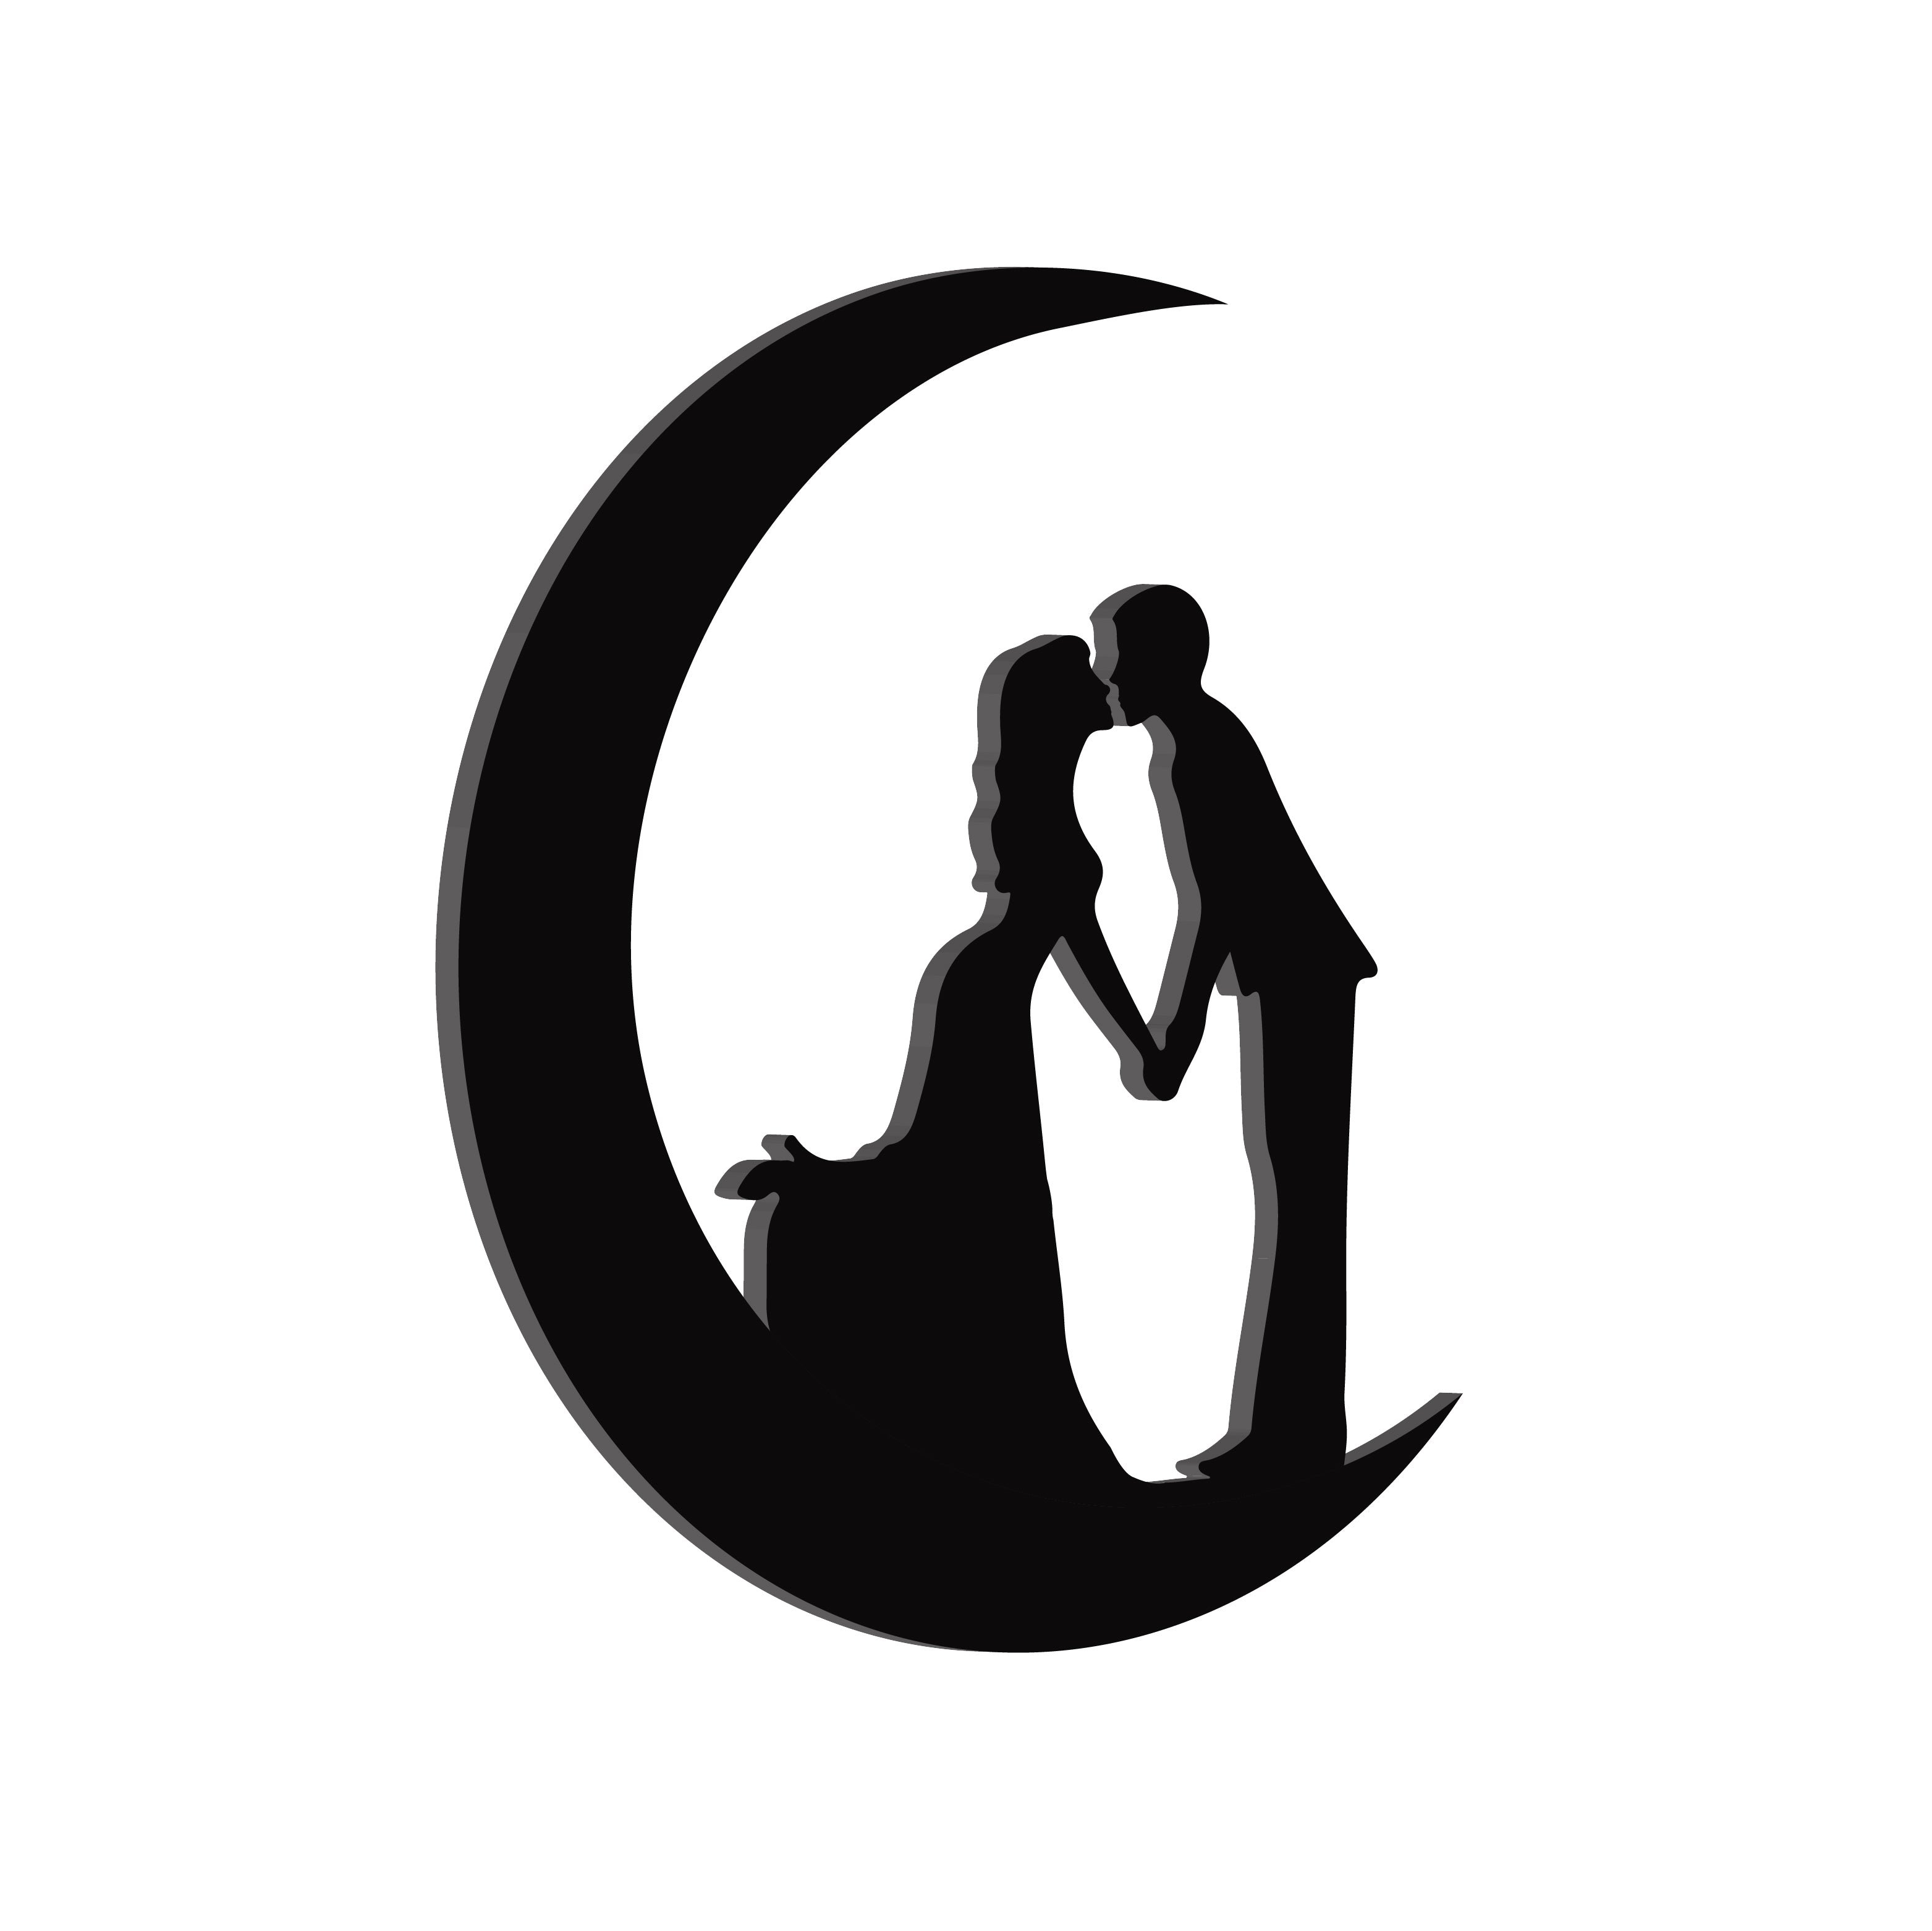 "Couple on the moon" Black Engineered Wood Wall Art Cutout, Ready to Hang Home Decor 4